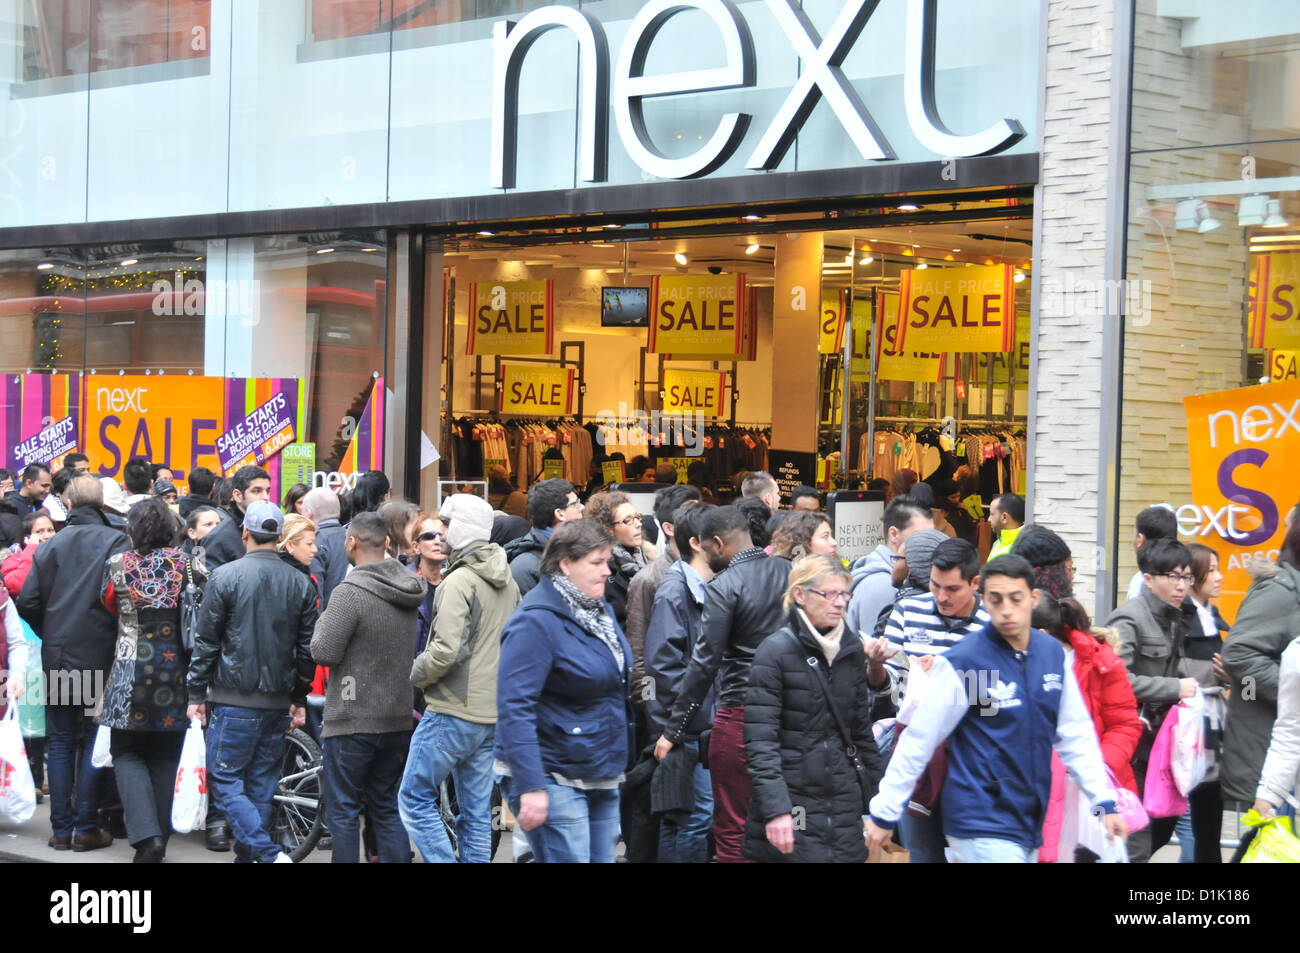 Oxford Street, London, UK. 26th December 2012. Boxing Day shoppers outside Next on Oxford Street. Shoppers fill the streets at the Boxing Day sales in central London. Credit:  Matthew Chattle / Alamy Live News Stock Photo